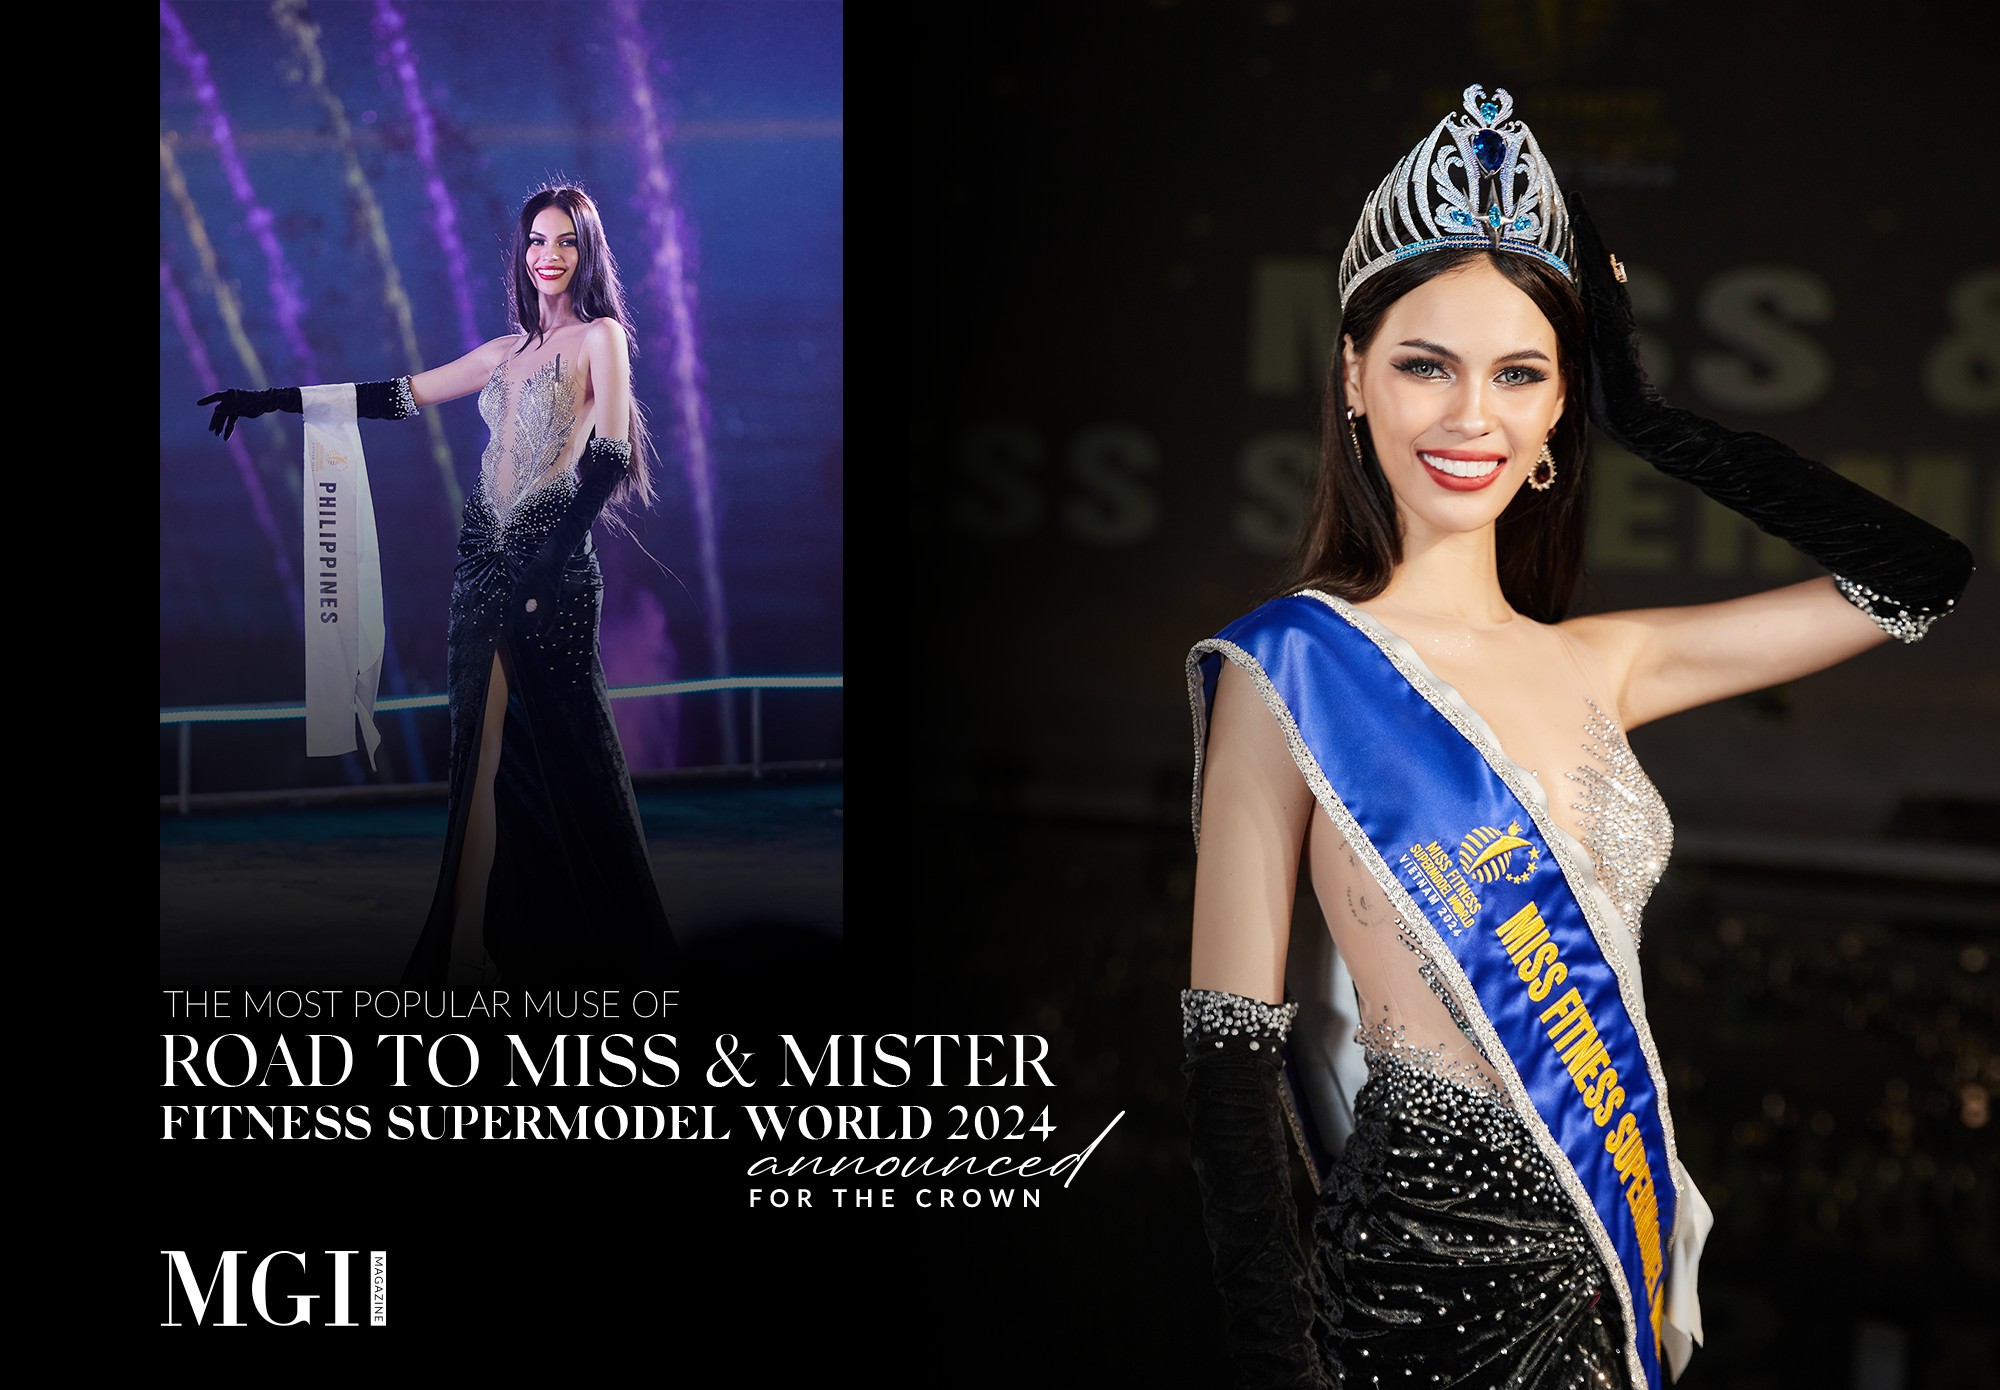 The most popular muse of “Road to Miss & Mister Fitness Supermodel World 2024” announced for the crown